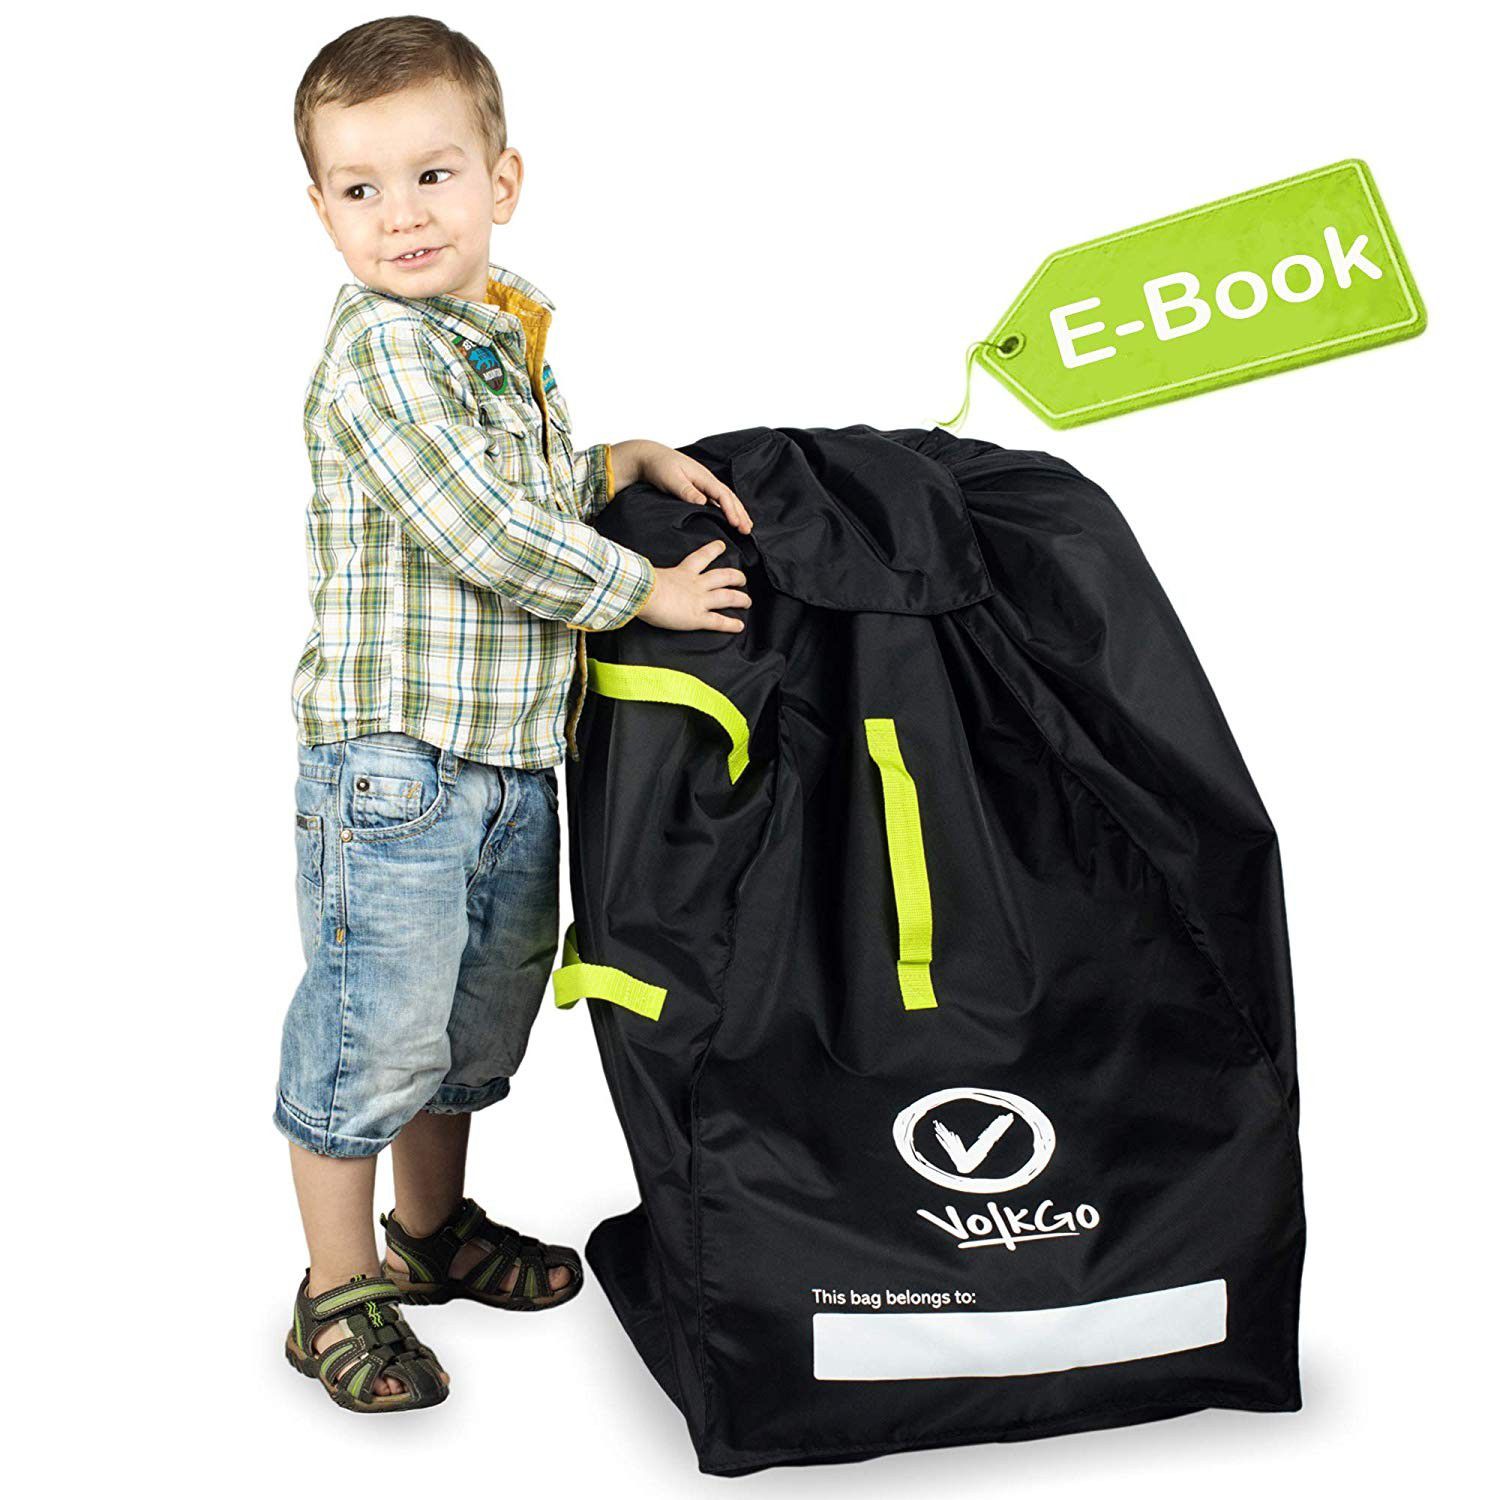 Durable Car Seat Travel Bag with E-Book